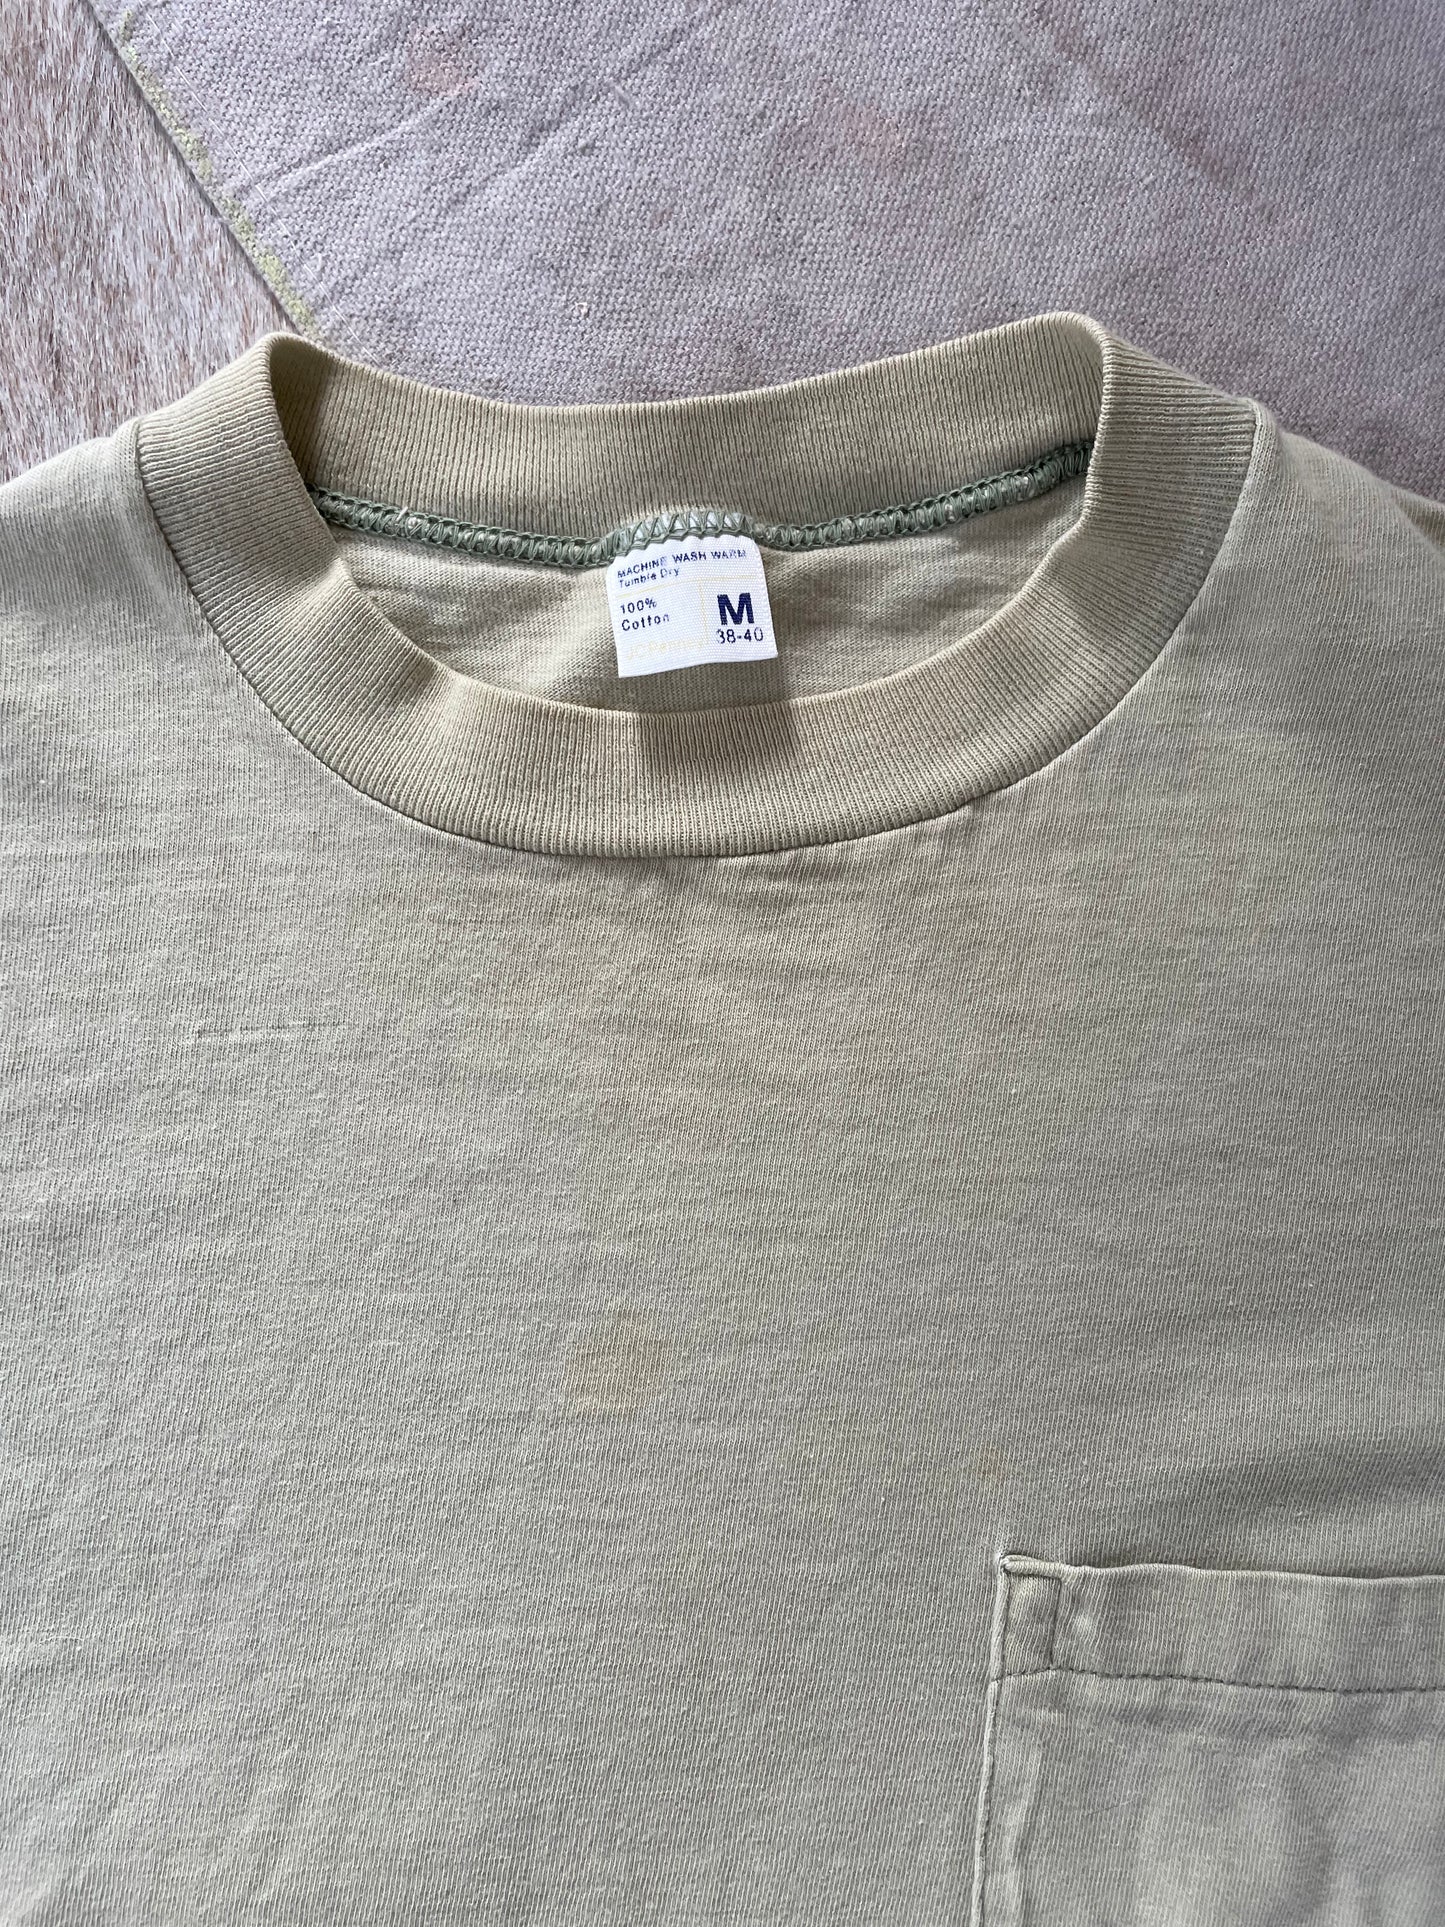 70s/80s Pale Mint JCPenney Pocket Tee